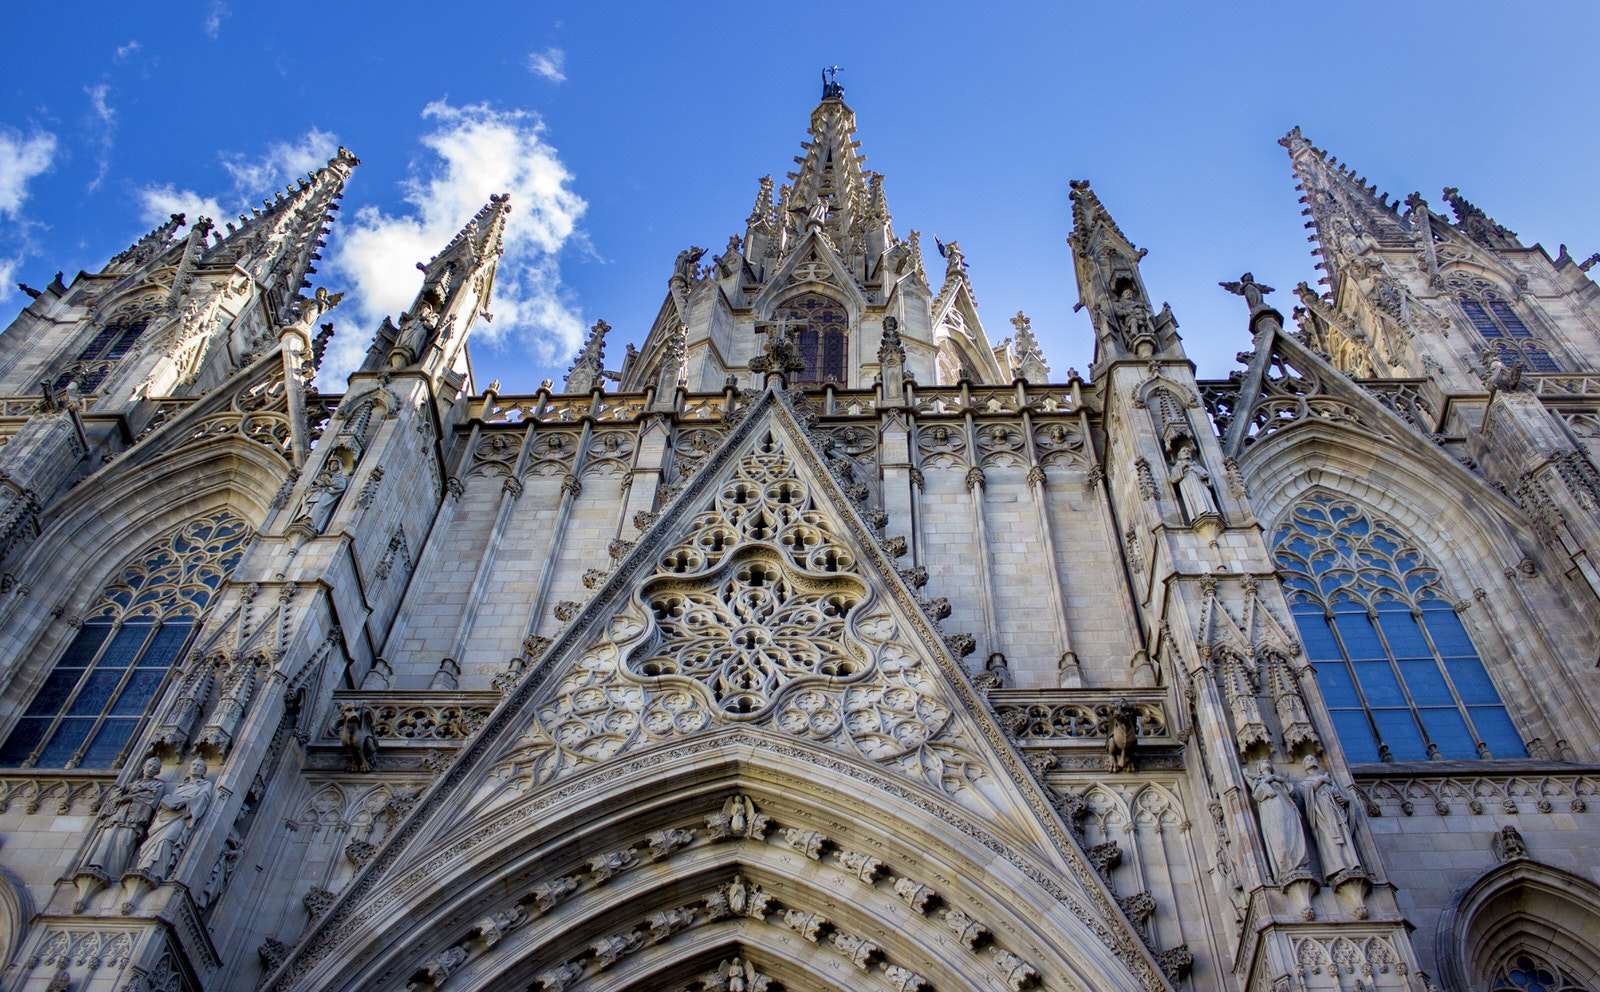 The richly decorated main facade of Barcelona's Catedral, dotted with spires, gargoyles and intricate stonework. Above the cathedral is a bright blue sky.